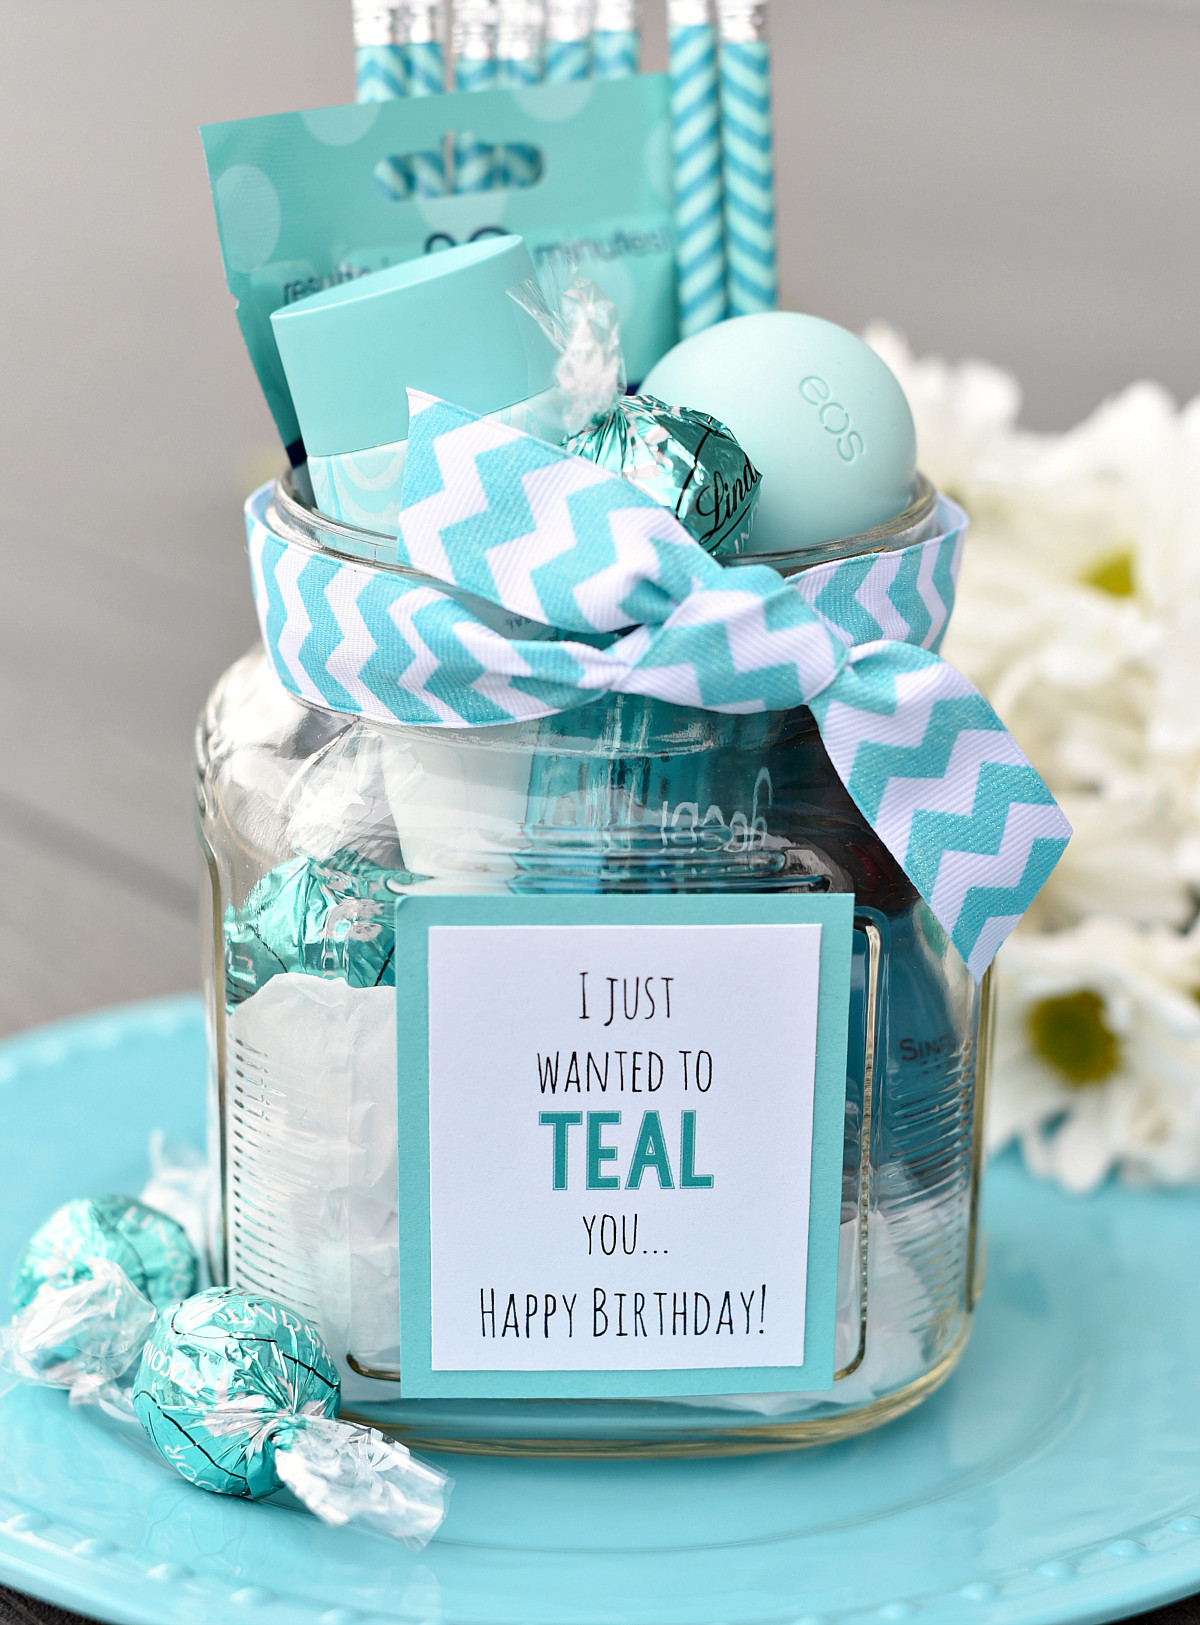 Gifts For Friends Birthday
 Teal Birthday Gift Idea for Friends – Fun Squared